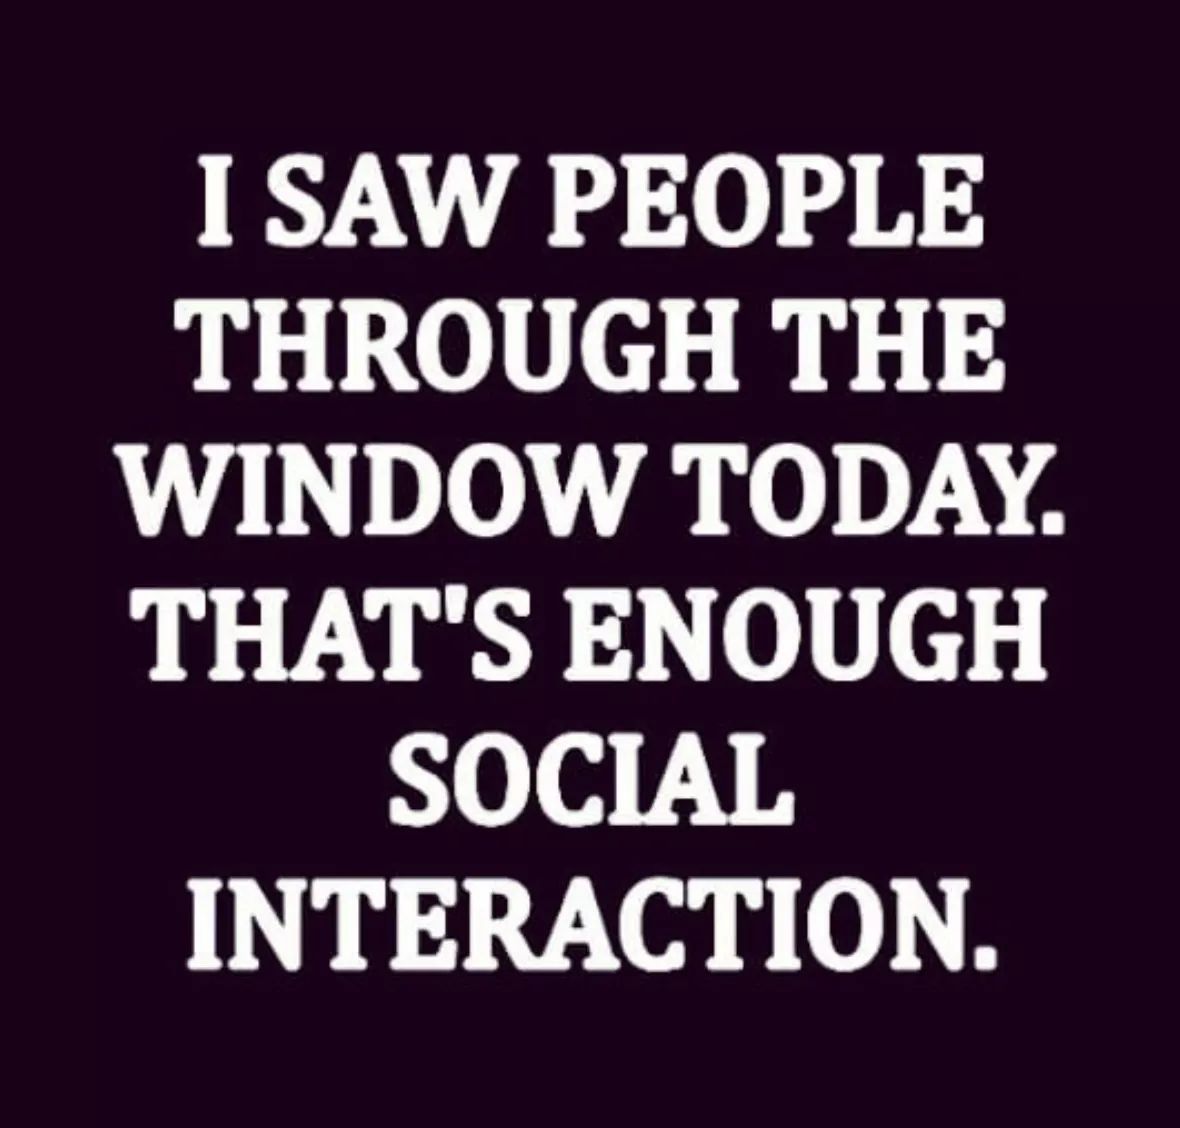 I Saw People Through The Window Today. That'S Enough Social Interaction.